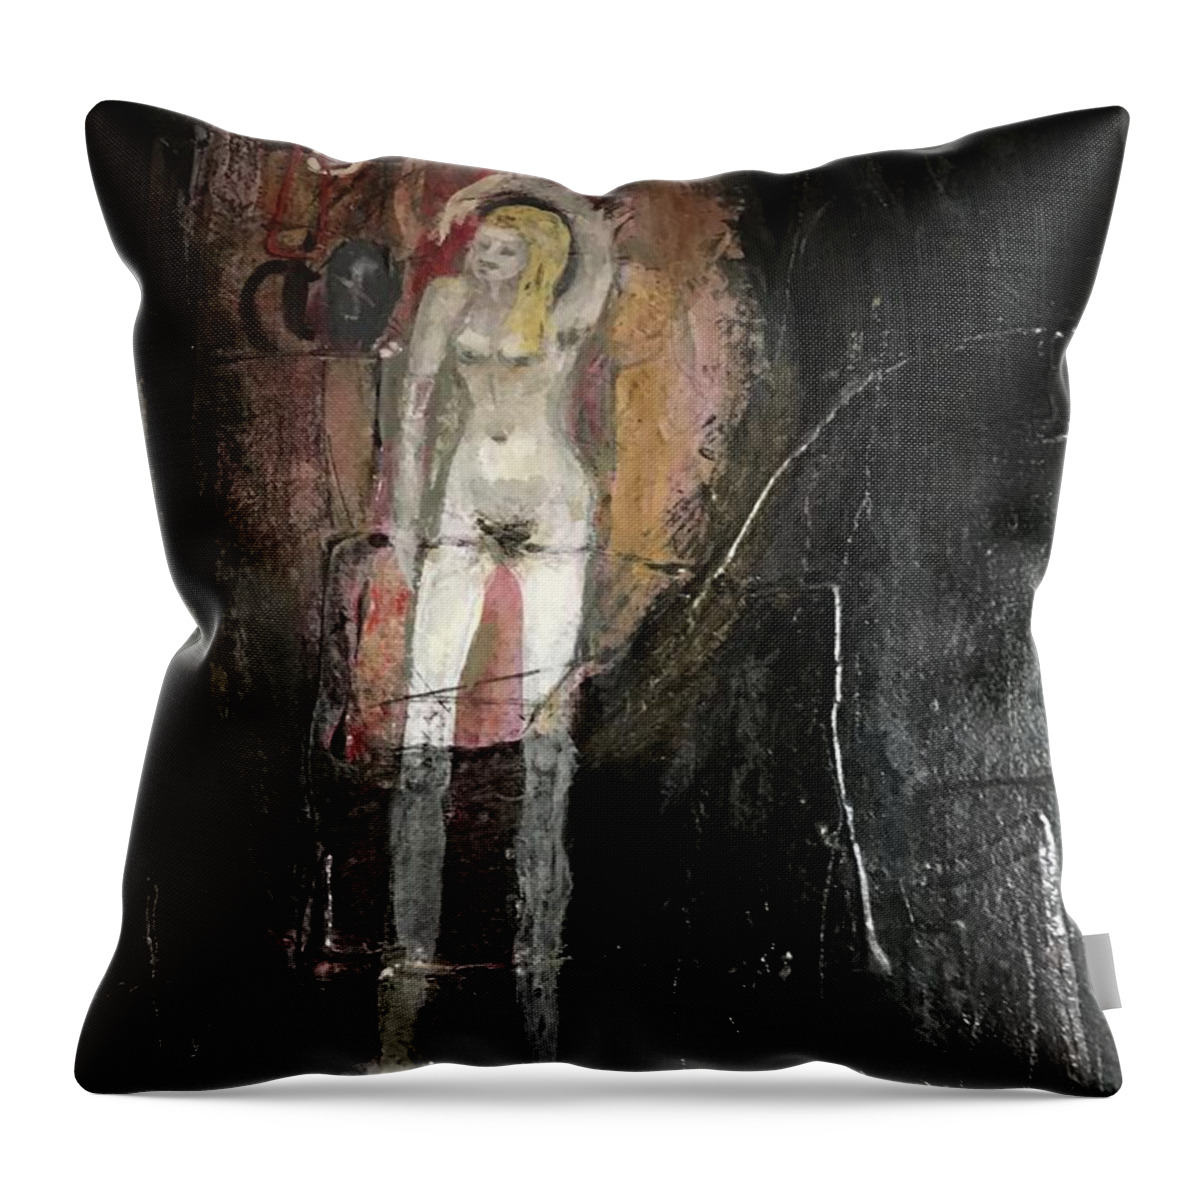 Acrylic Throw Pillow featuring the painting Long Legged Blonde by Carole Johnson